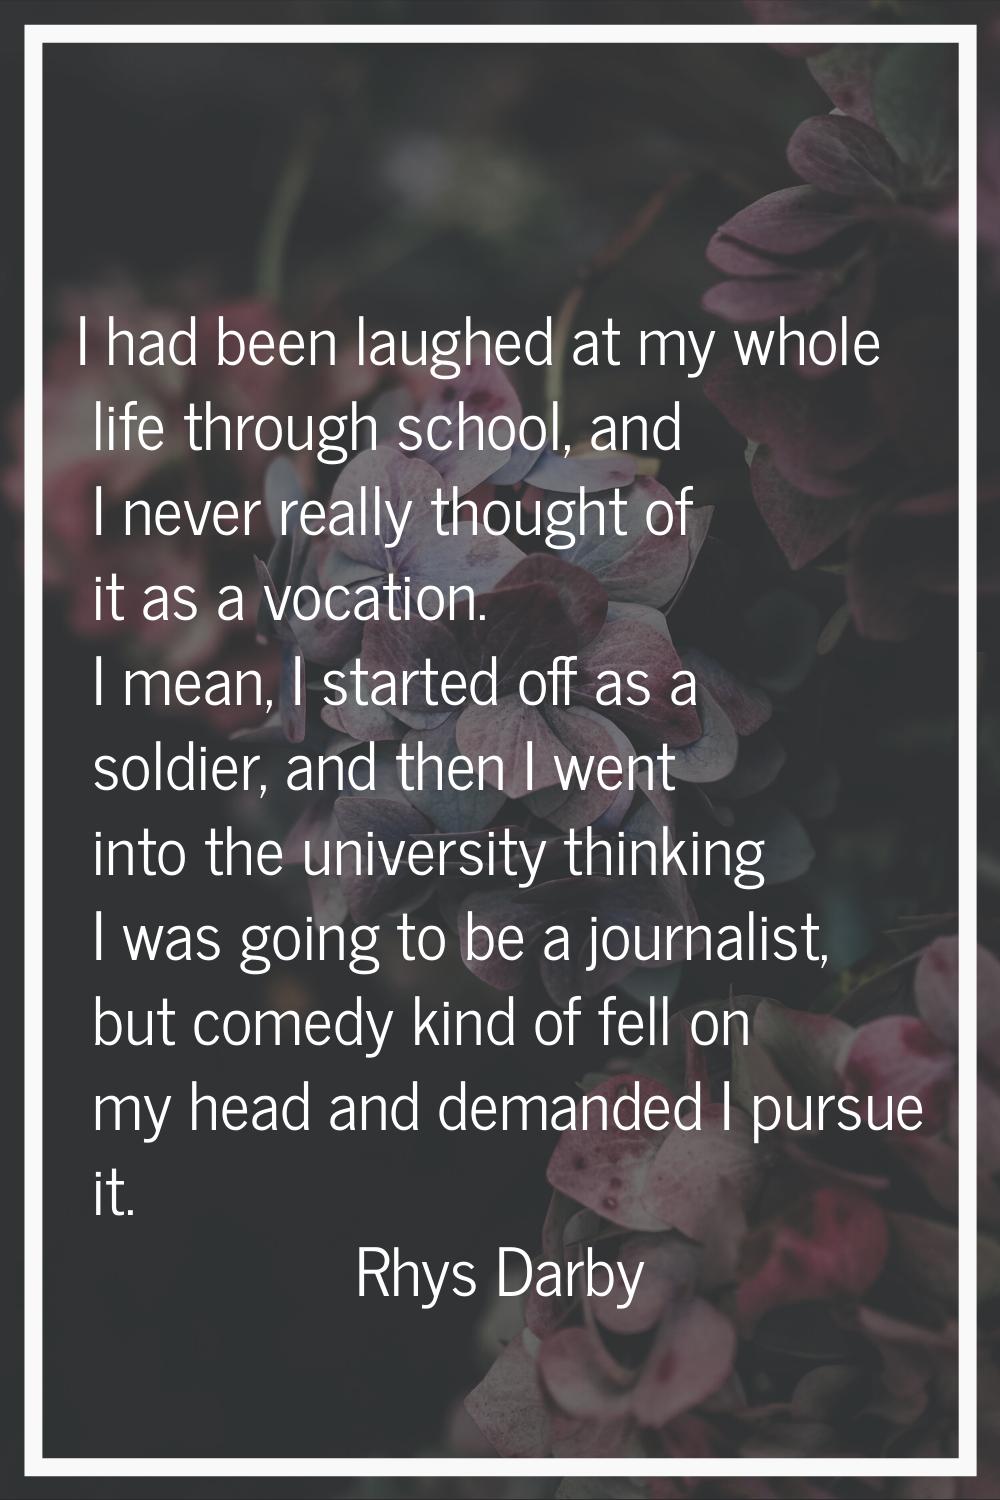 I had been laughed at my whole life through school, and I never really thought of it as a vocation.